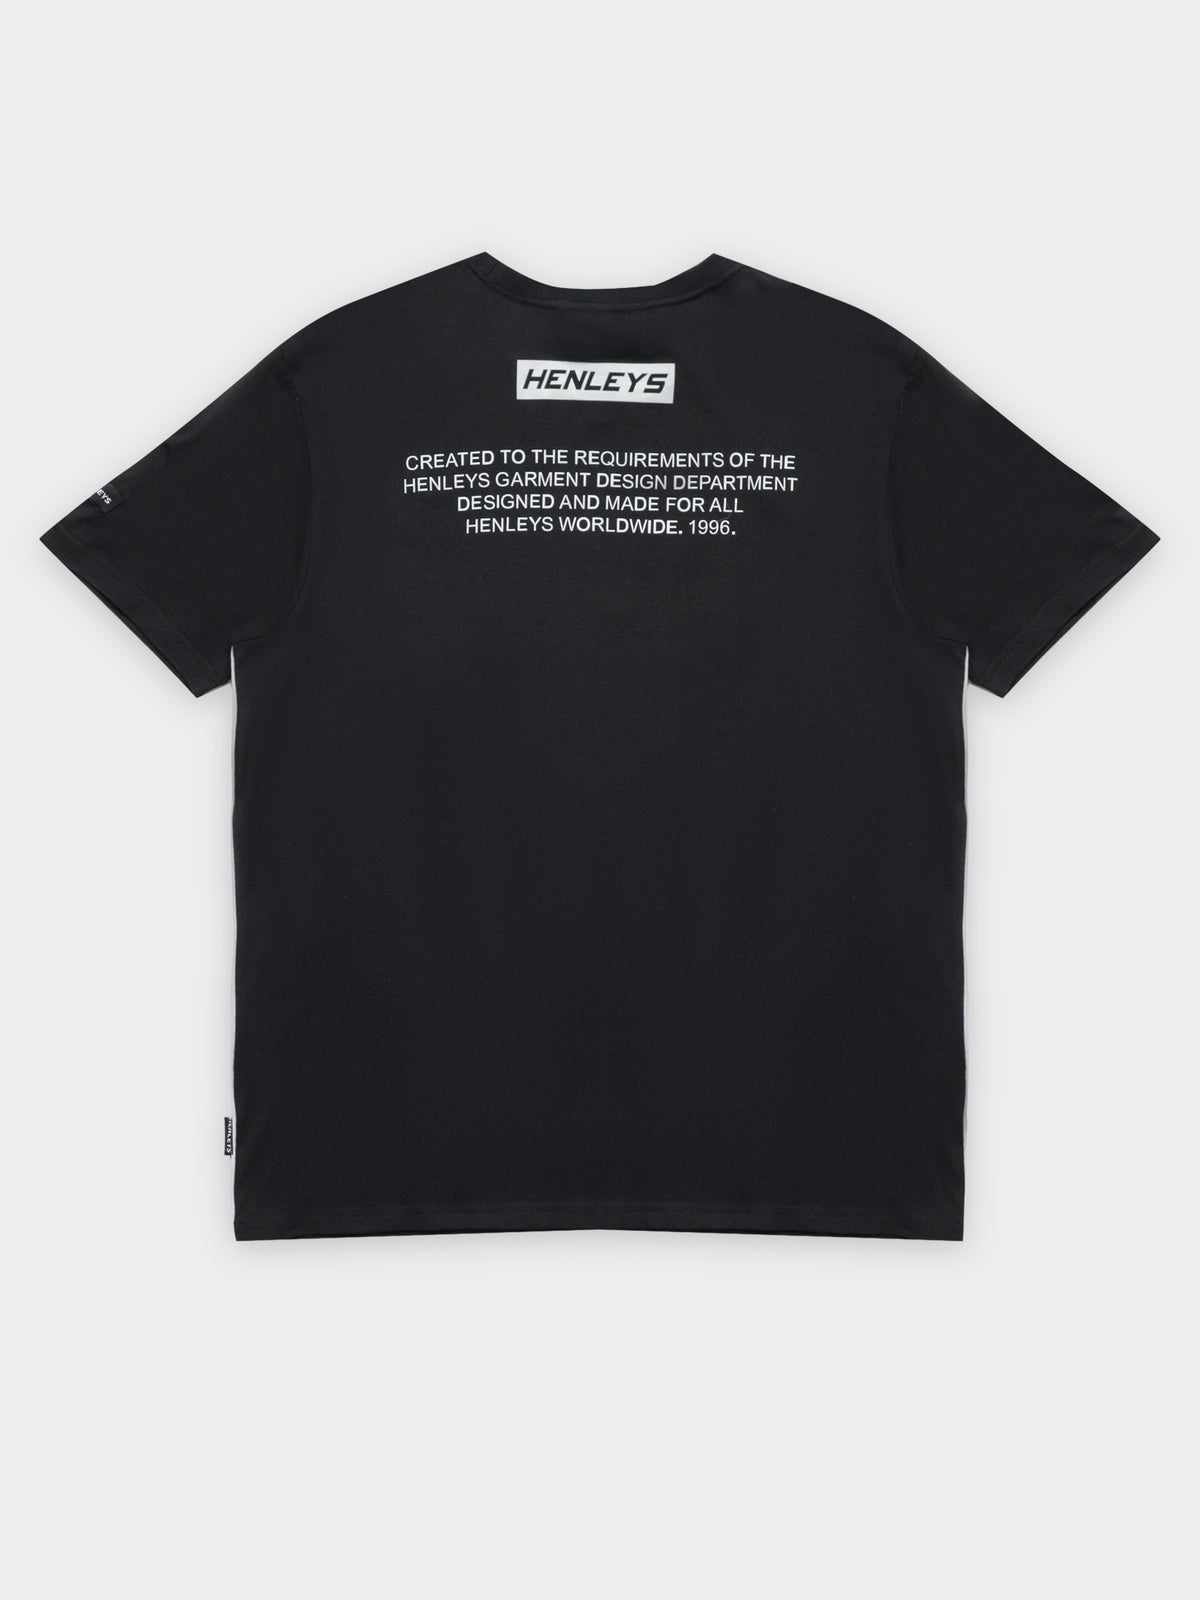 Master Reflective T-Shirt in Black